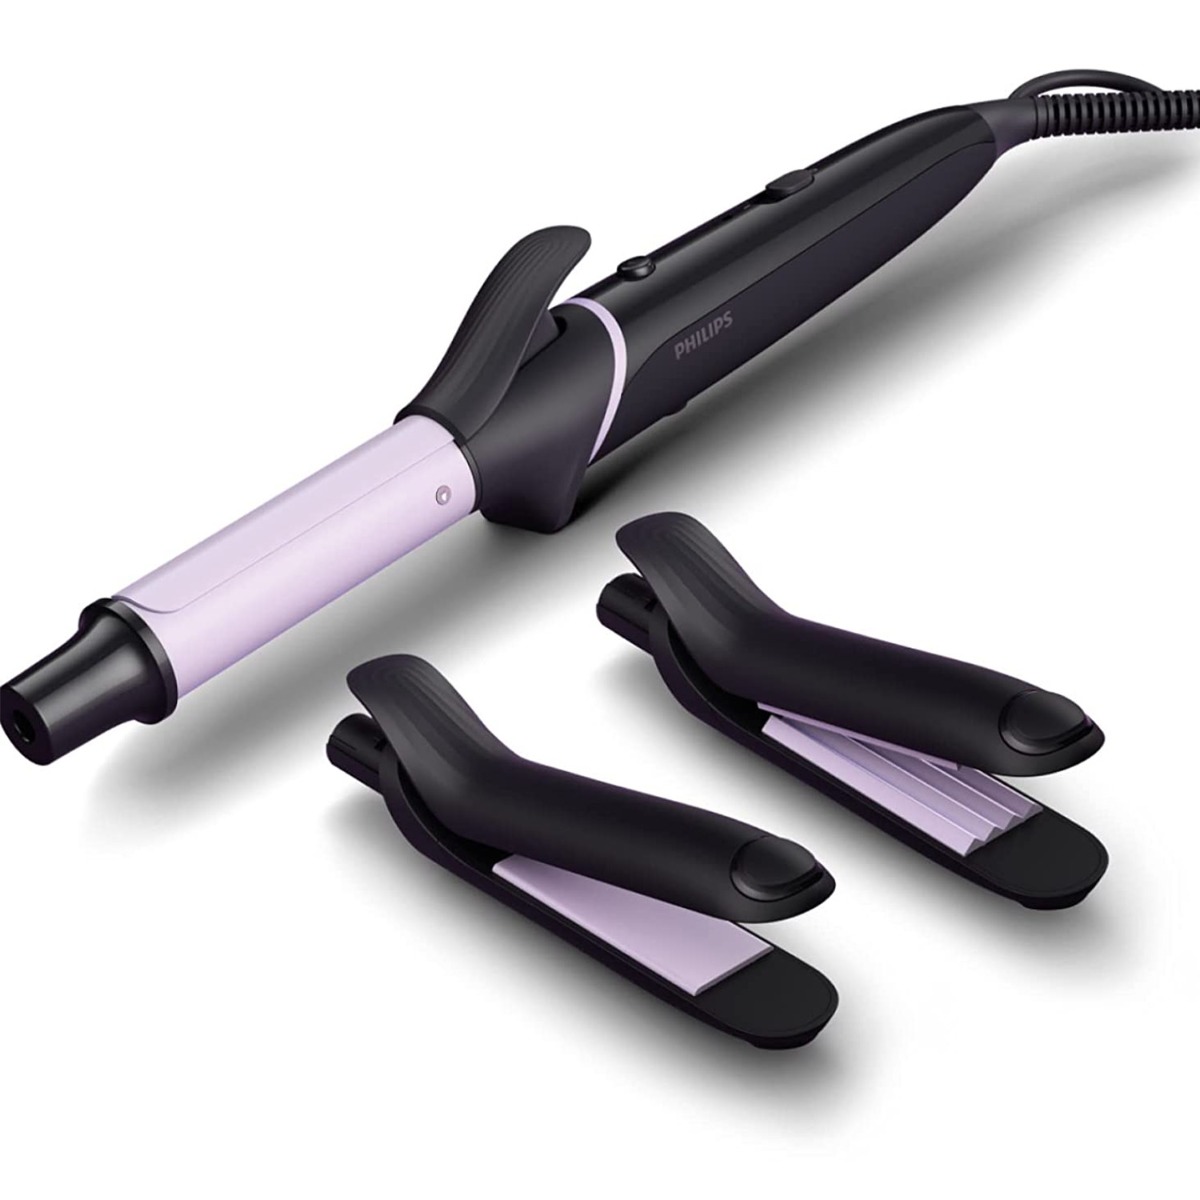 Philips Crimp, Straighten or Curl - Multi Styling Kit, BHH816/00